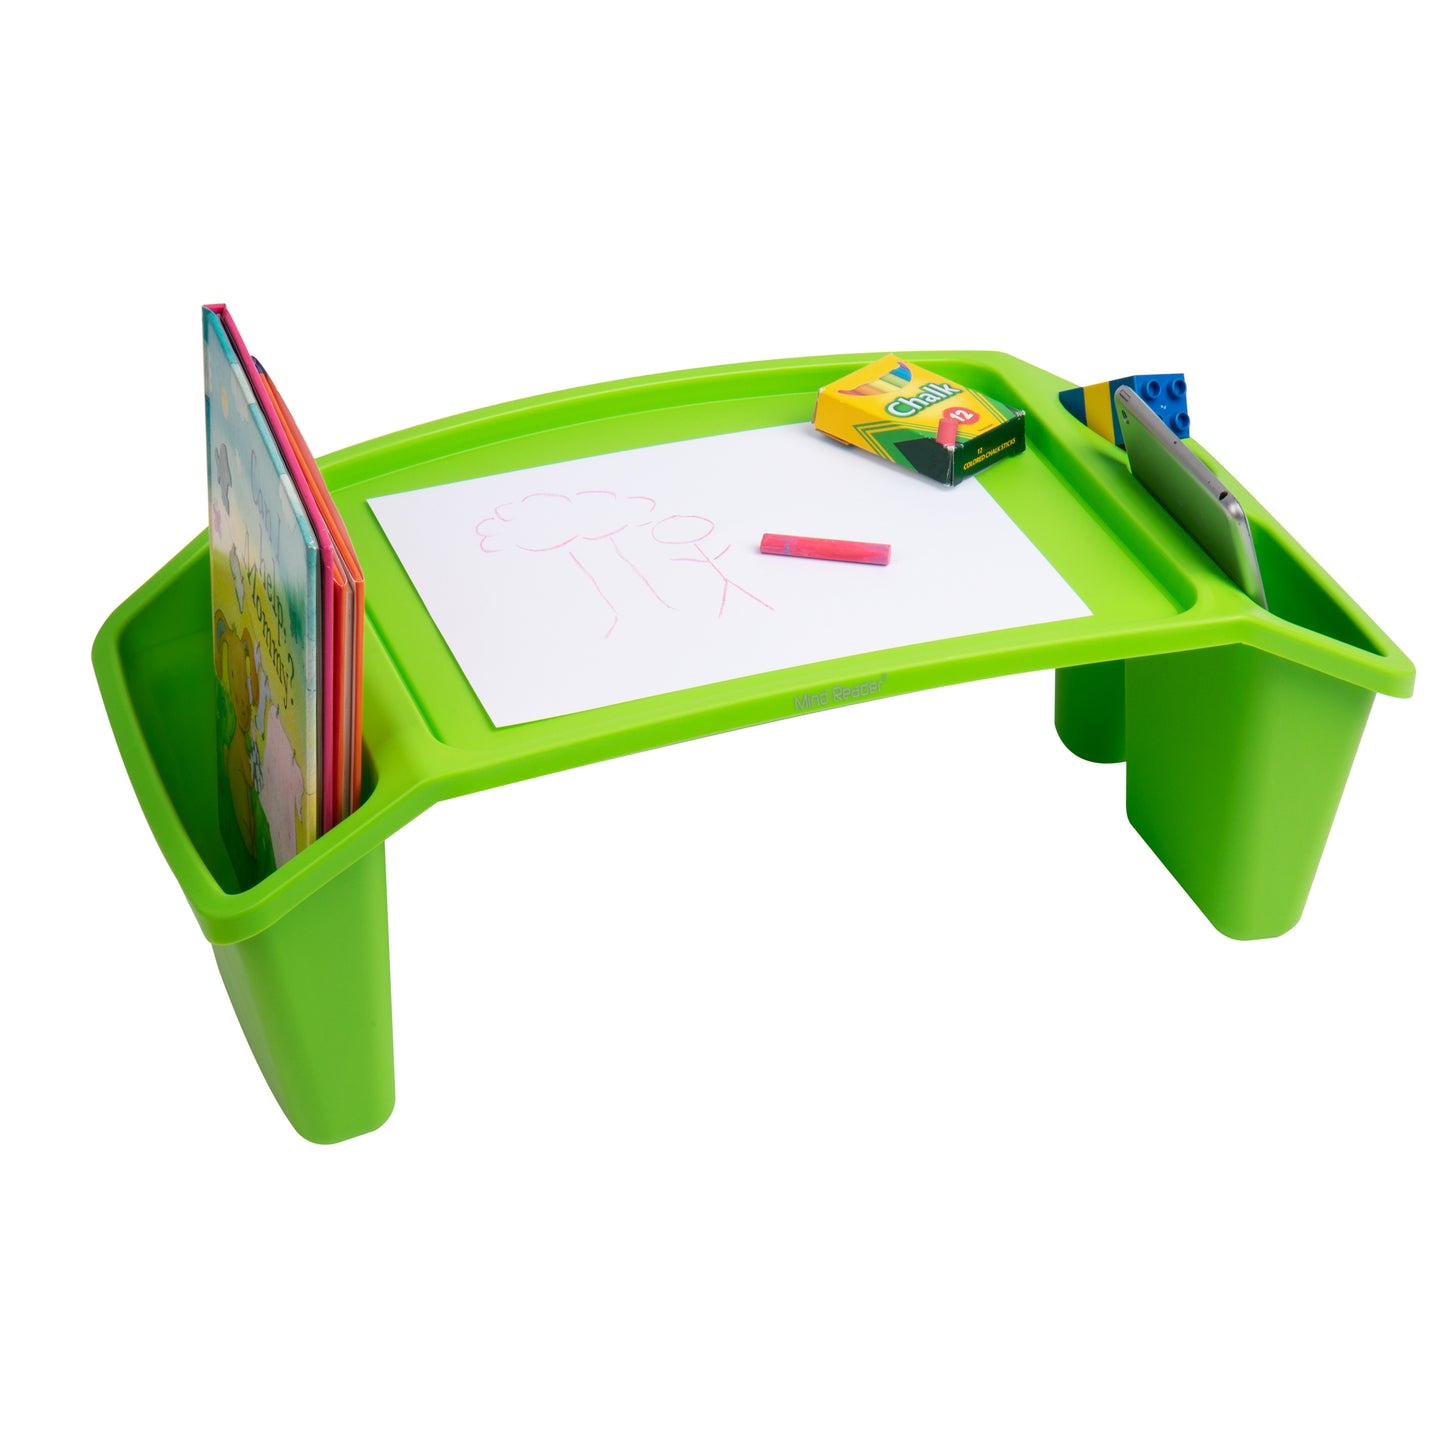 Mind Reader Kids Lap Desk, Activity Tray, Drawing, Stackable, Classroom, Portable, Plastic, 22.25"L x 10.75"W x 8.5"H